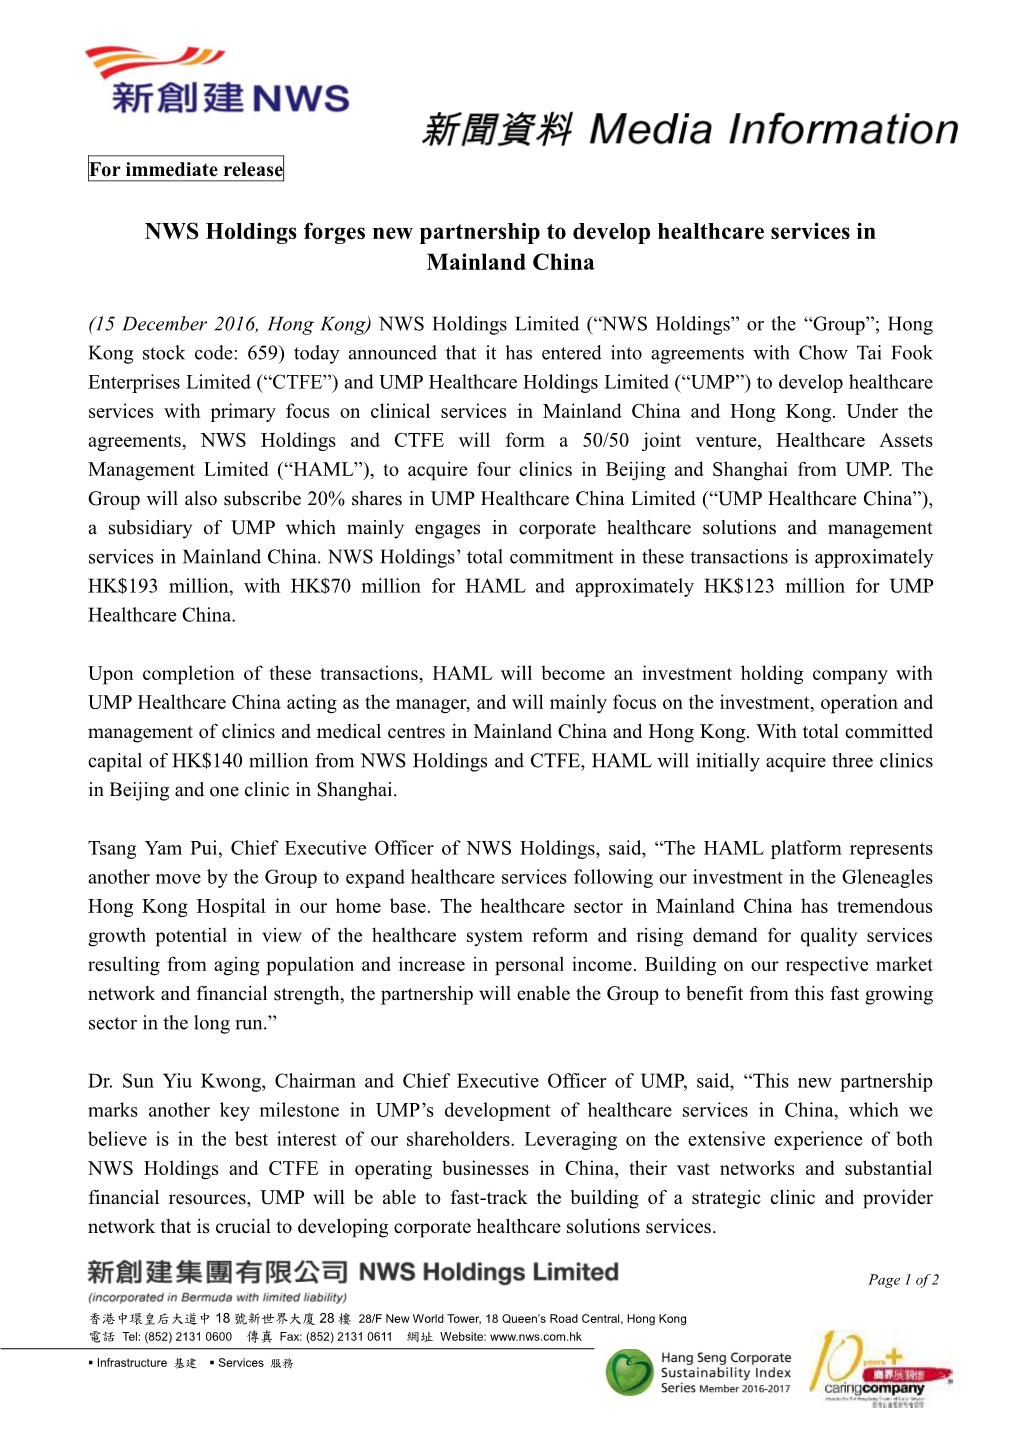 NWS Holdings Forges New Partnership to Develop Healthcare Services in Mainland China